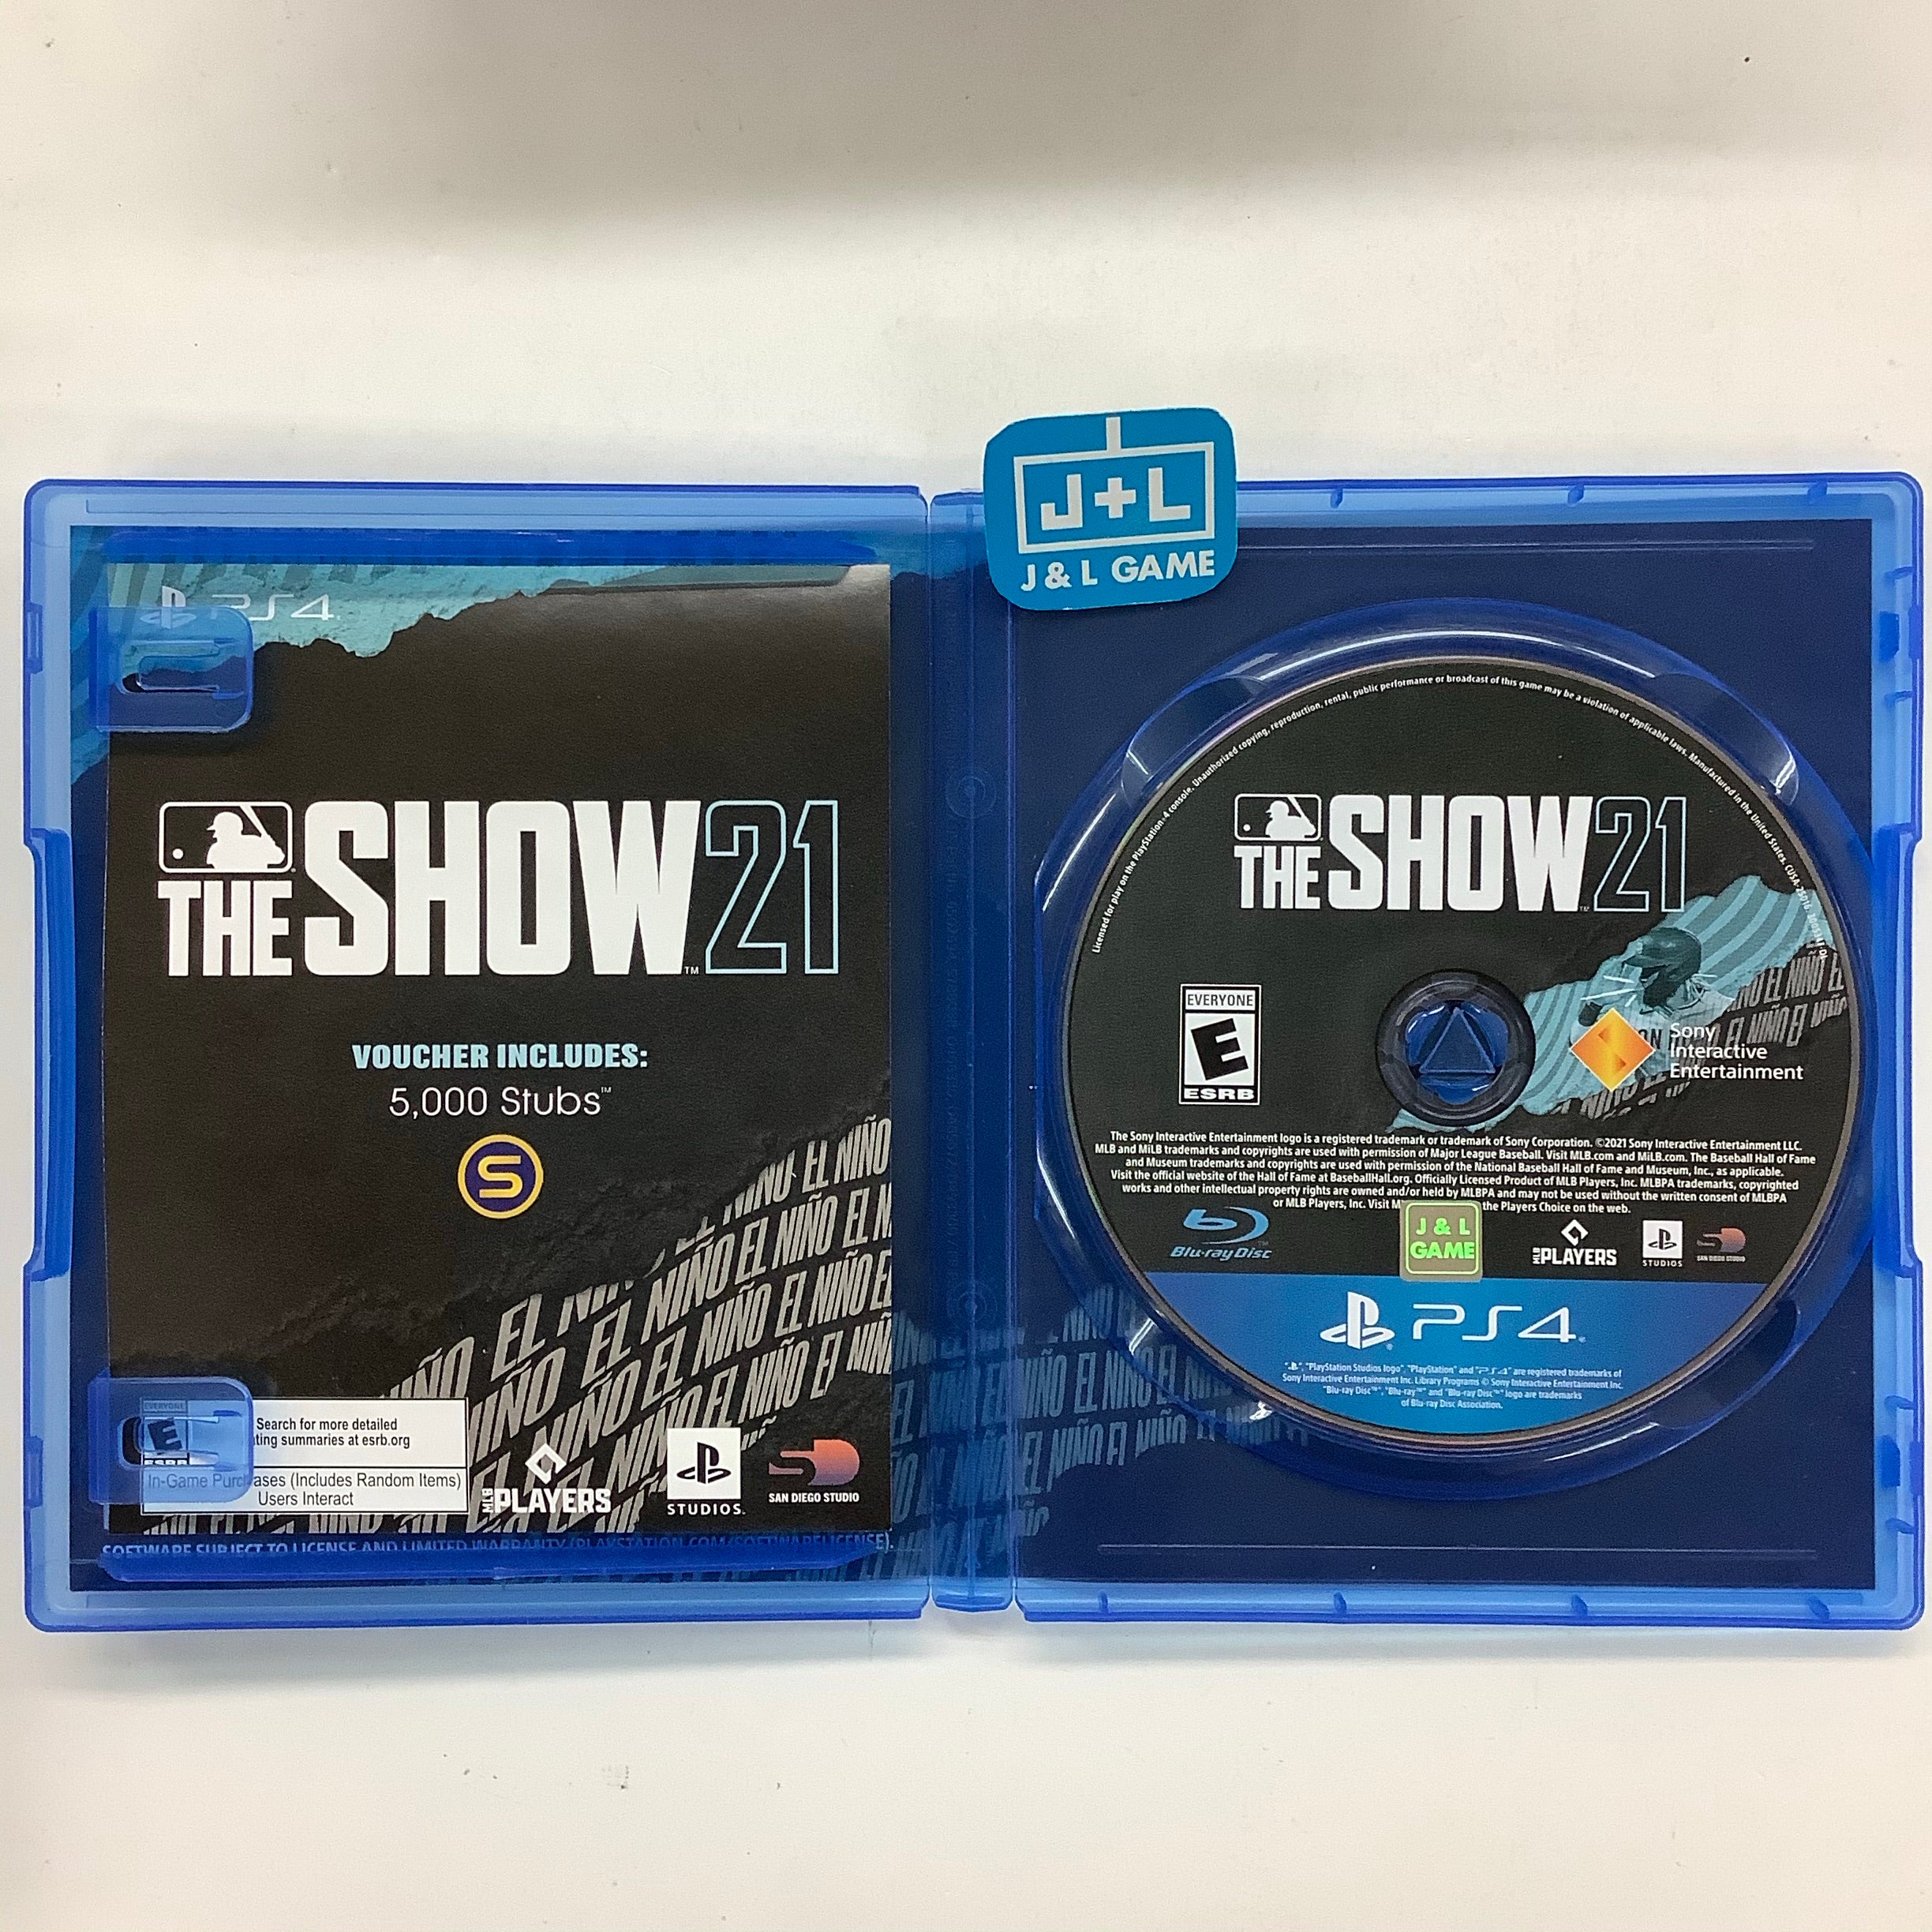 MLB The Show 21 - (PS4) PlayStation 4 [Pre-Owned] Video Games Sony Interactive Entertainment   